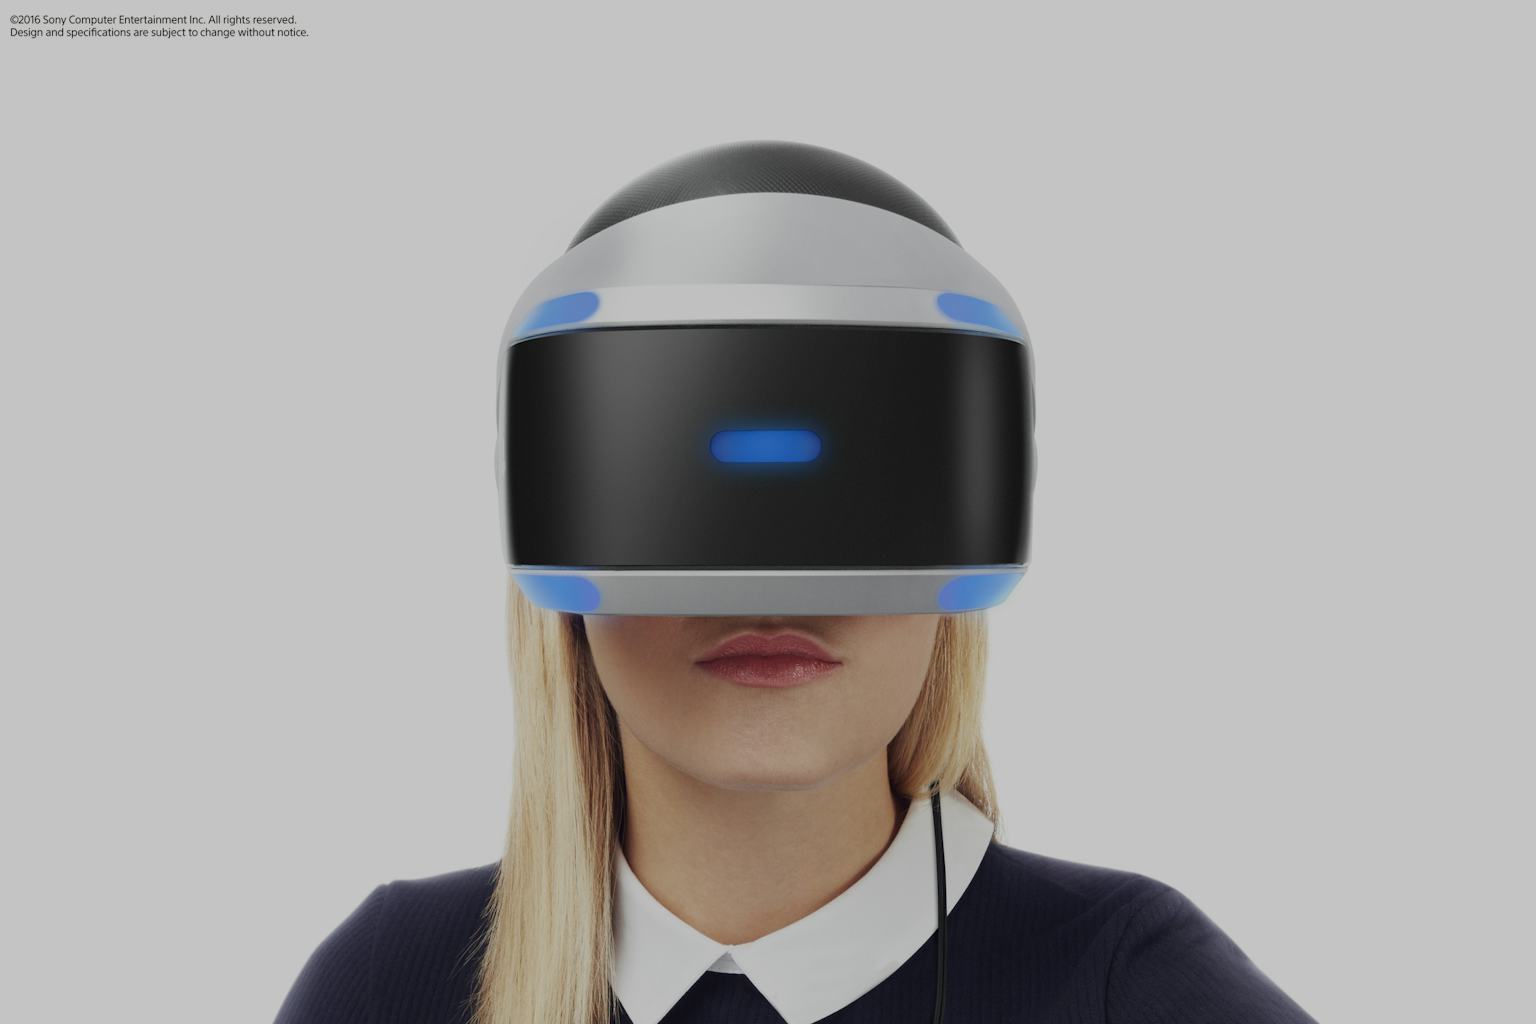 Is Sony Playstation VR Worth The Money?